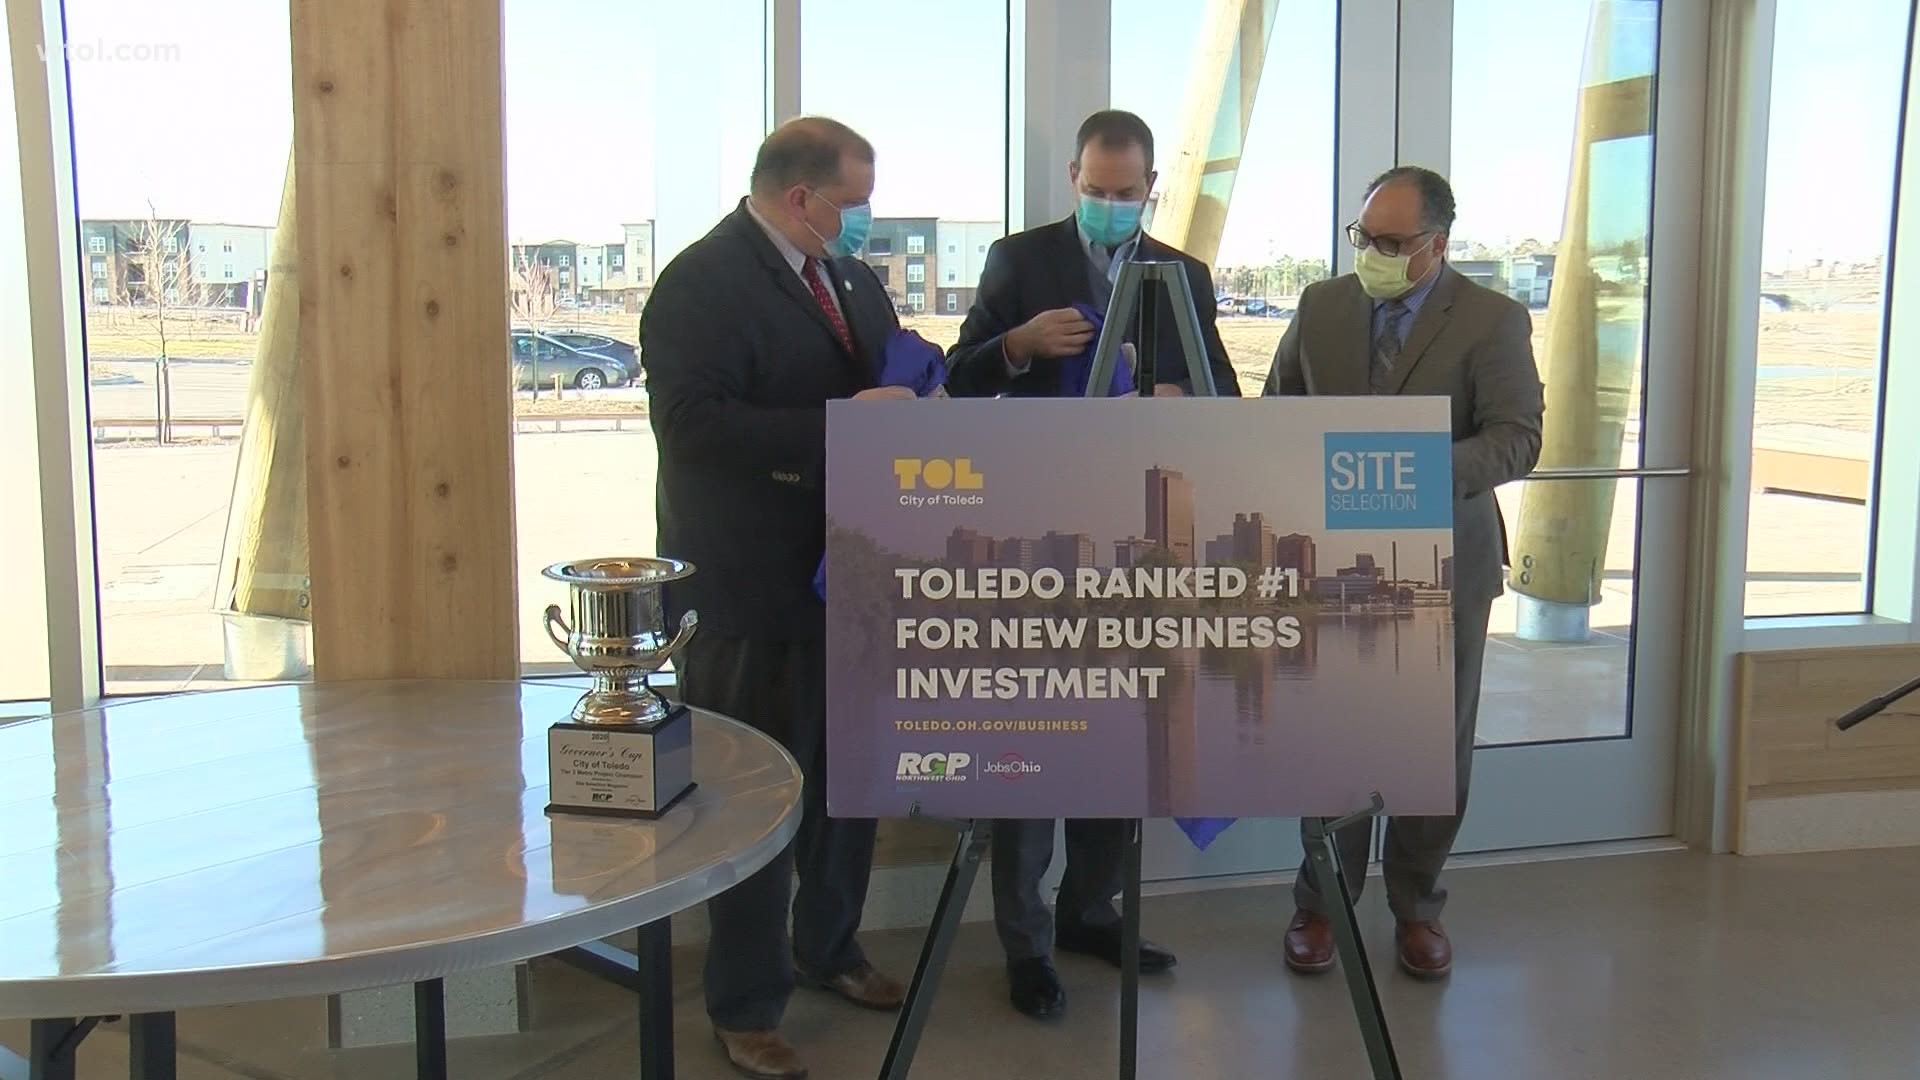 "You will do better in Toledo." That's the saying as you drive into town. The rest of the world knows it now too after top ranking in new business investment.